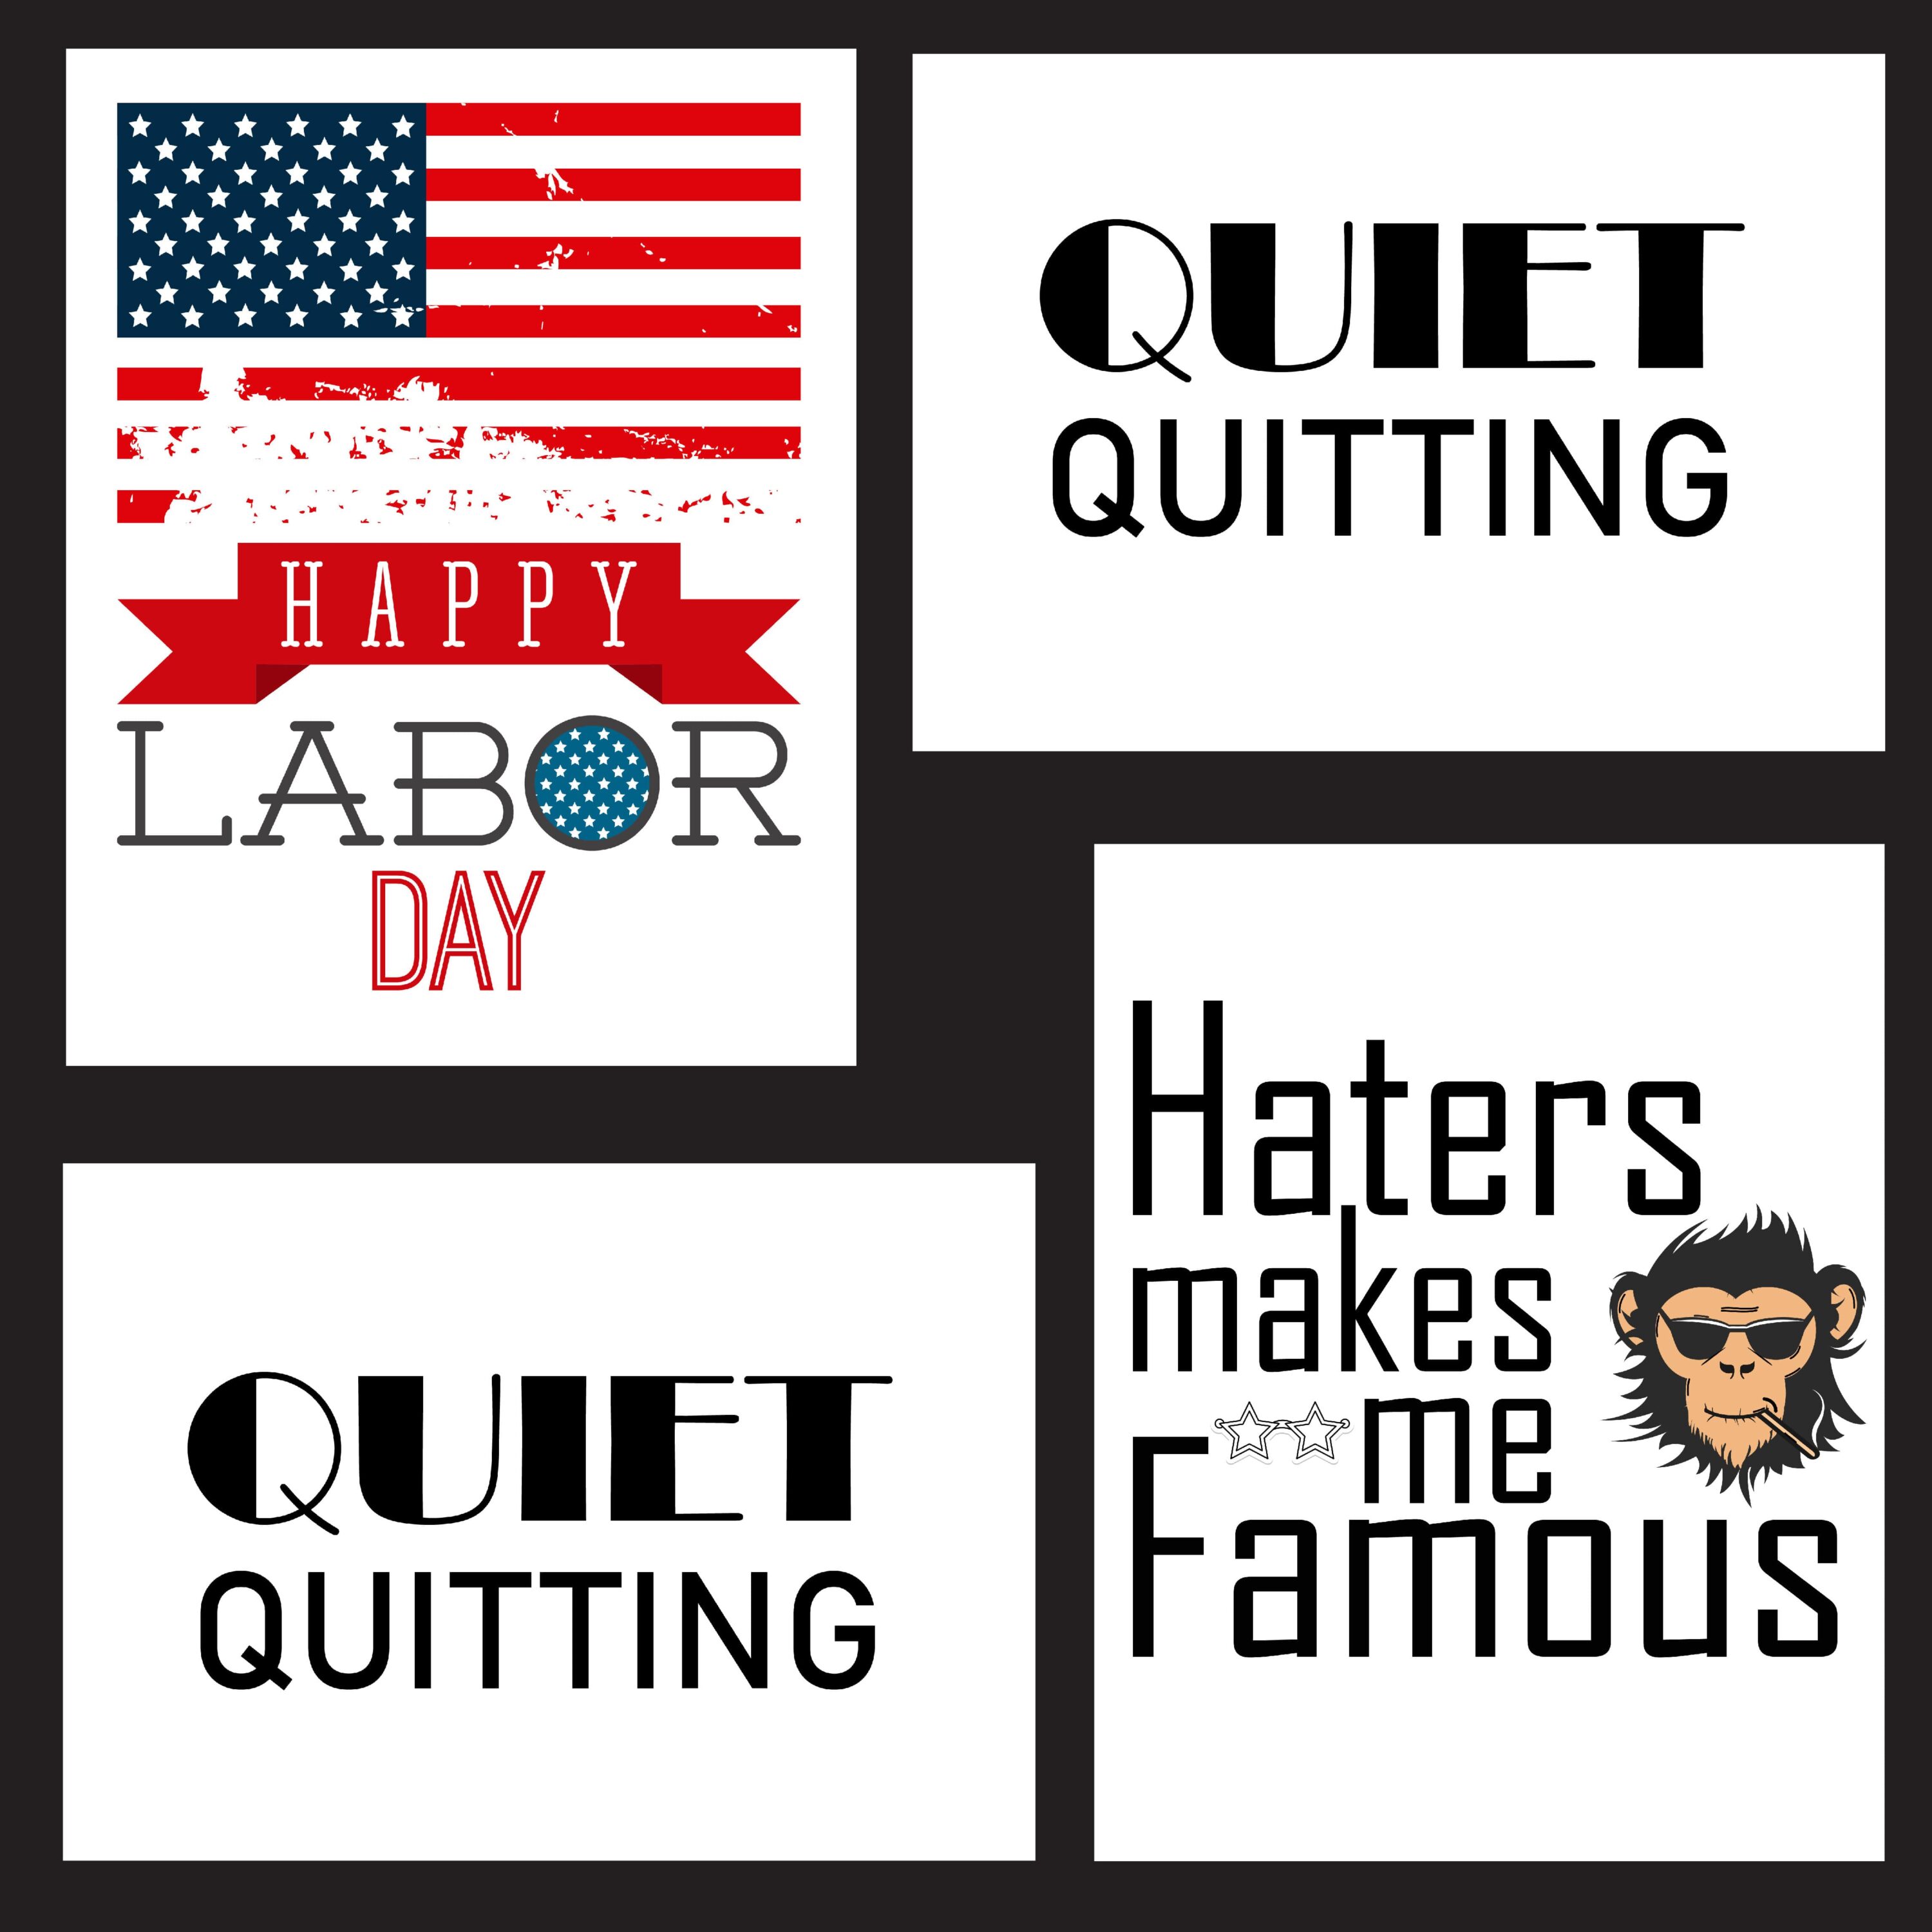 Happy Labor Day T-shirt Design cover image.